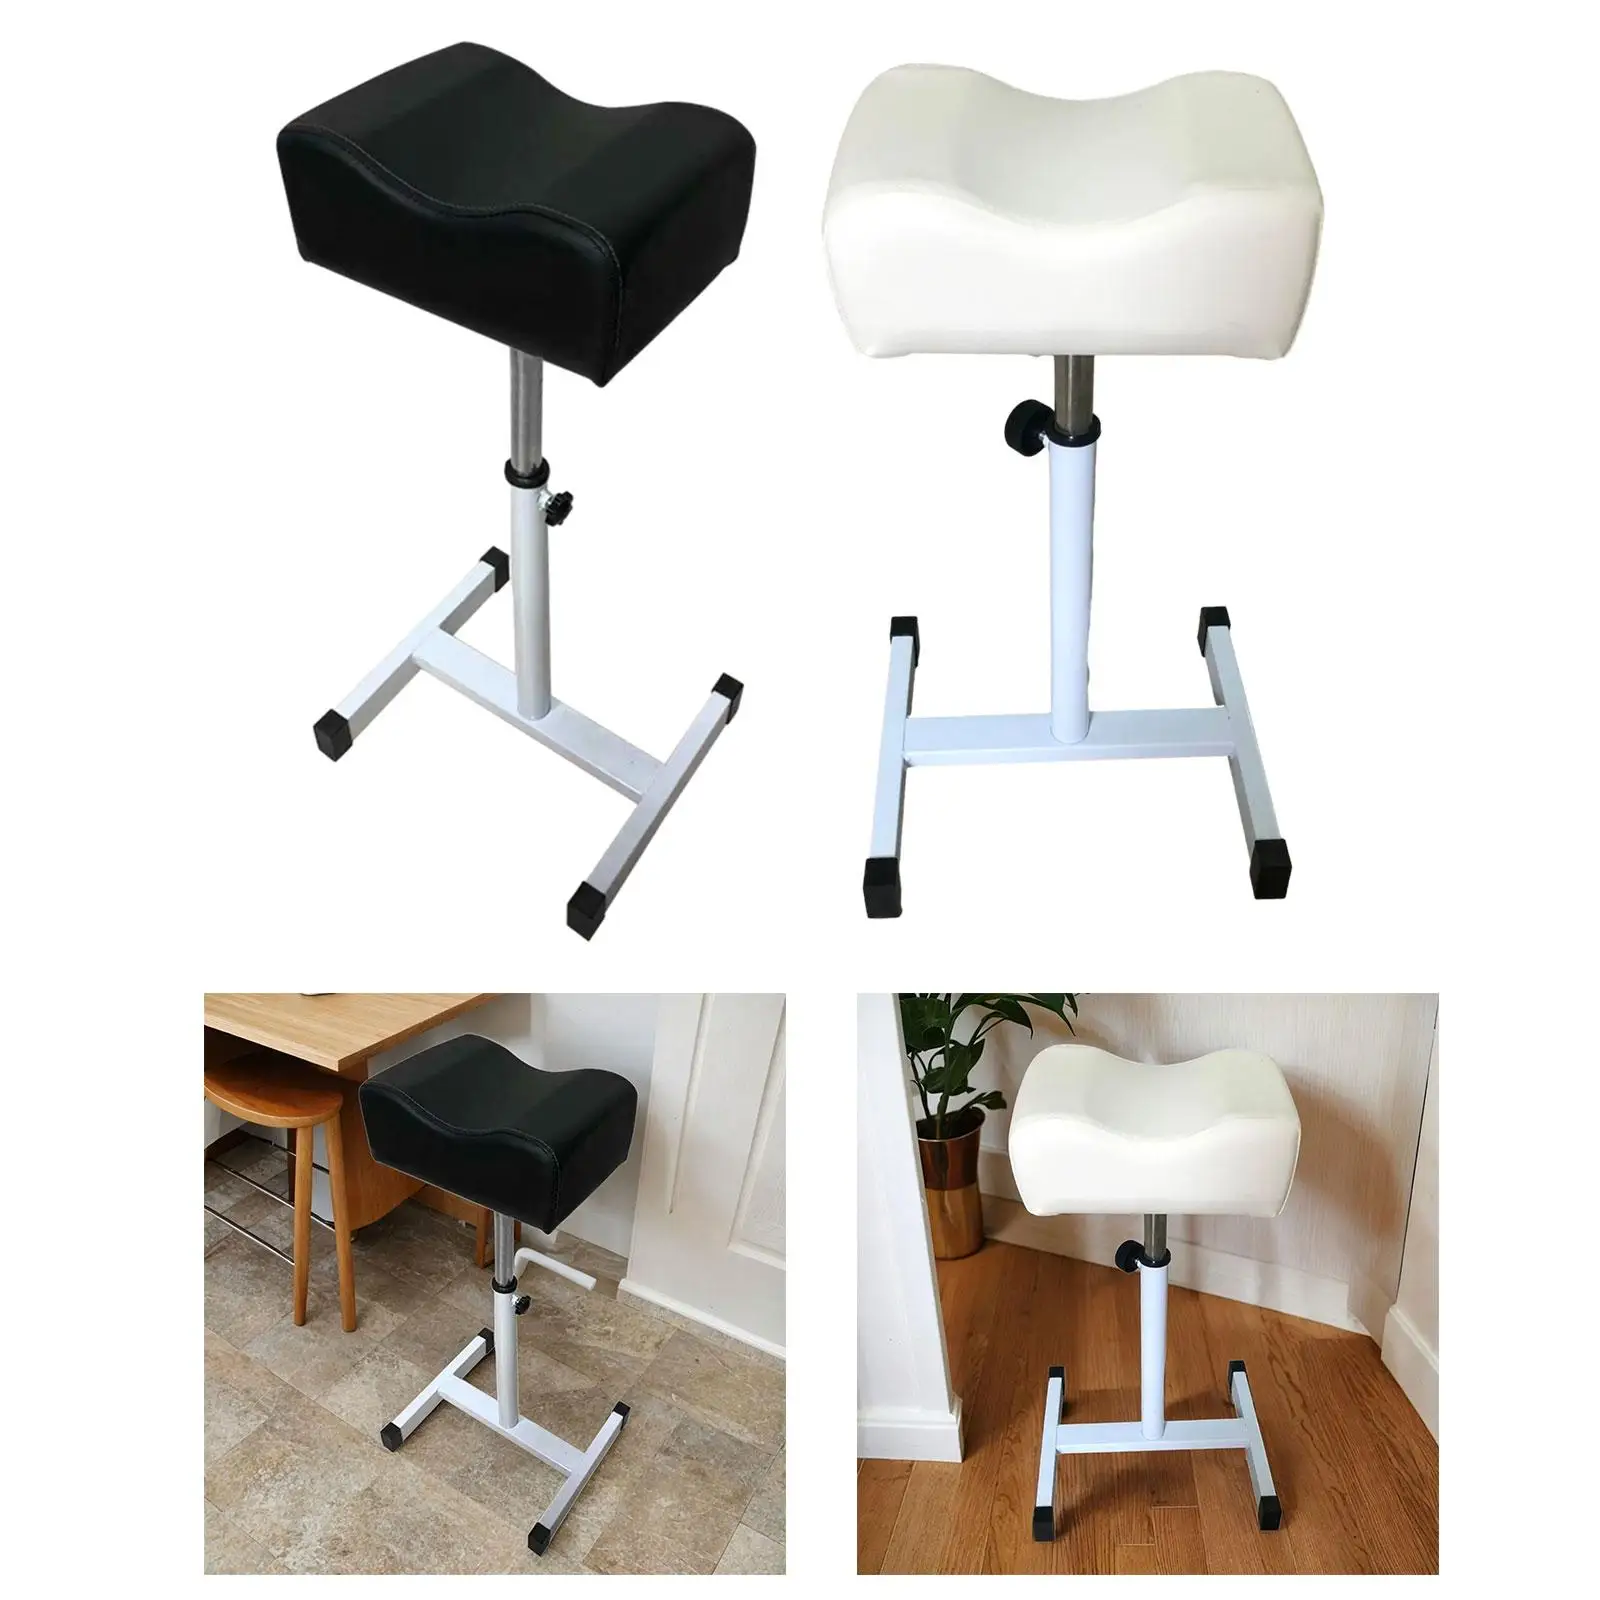 Pedicure Manicure Footrest Durable Foot Nail Beauty Stool Stand Foot Massage Stools Beauty Footrest Pedicure Stool for Salon SPA